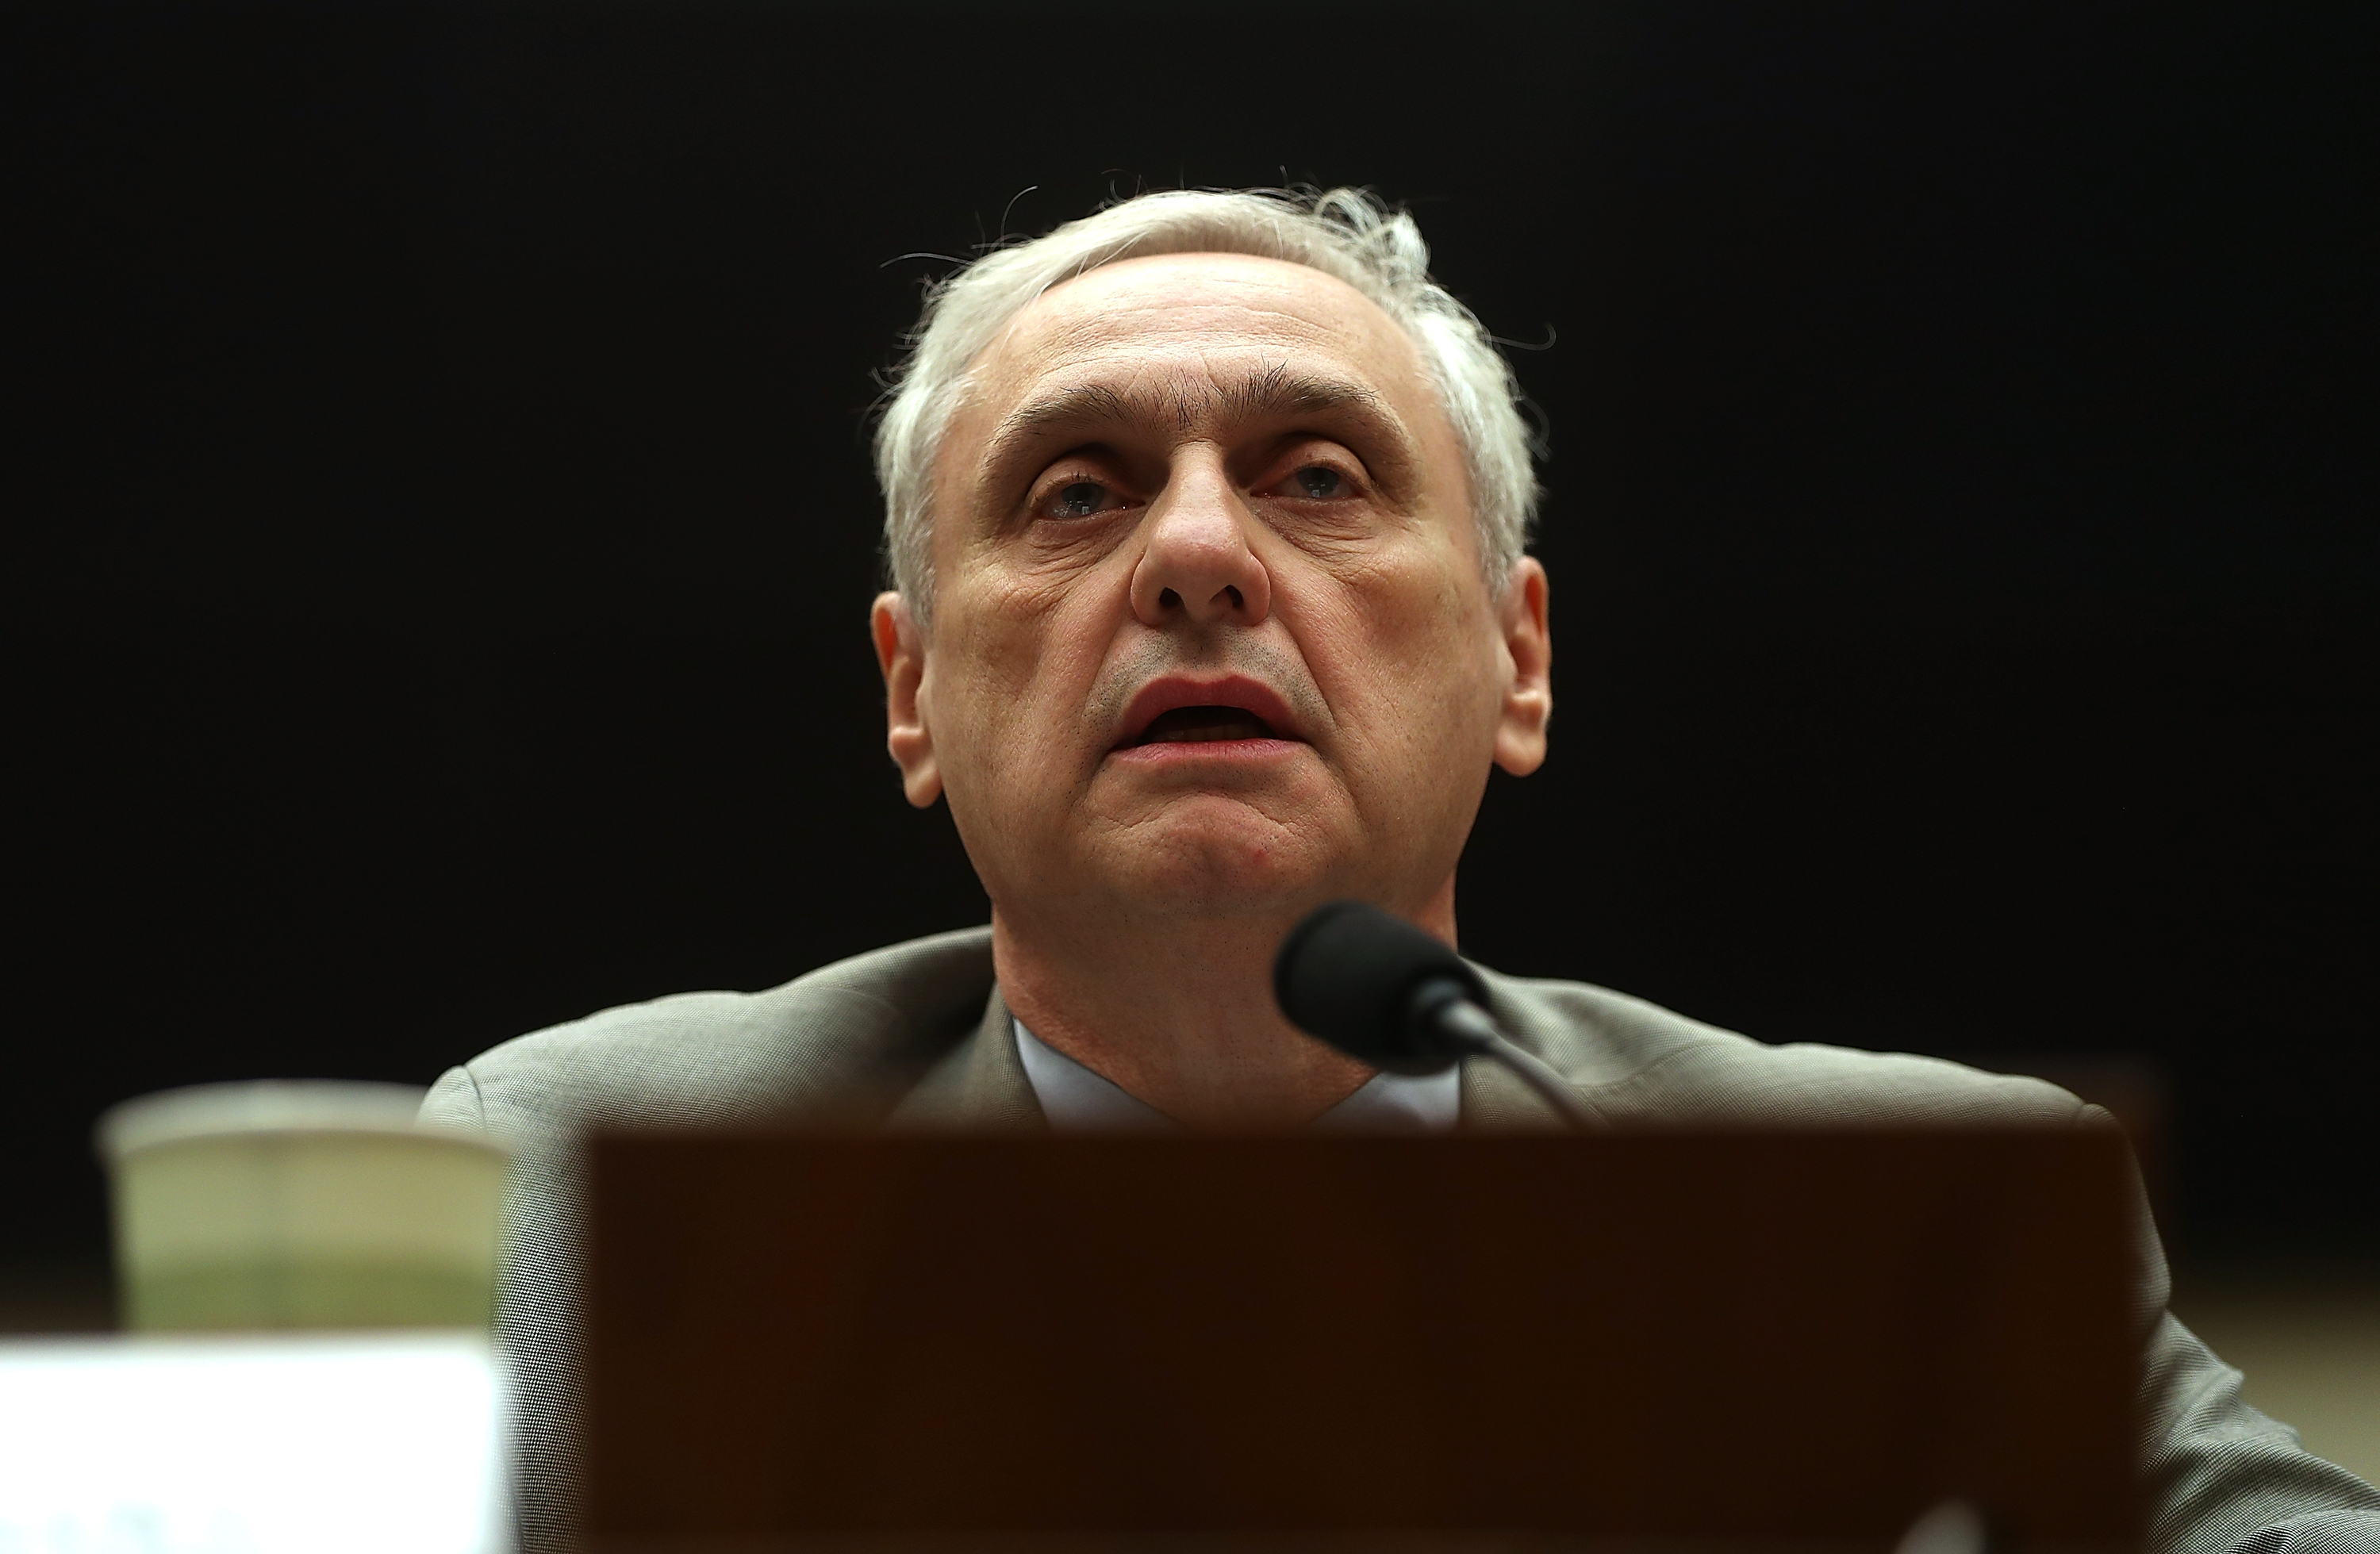 Ninth Circuit Appeals Court Judge Alex Kozinski testifies during a House Judiciary Committee hearing on March 16, 2017 in Washington, DC. (Justin Sullivan&mdash;Getty Images)